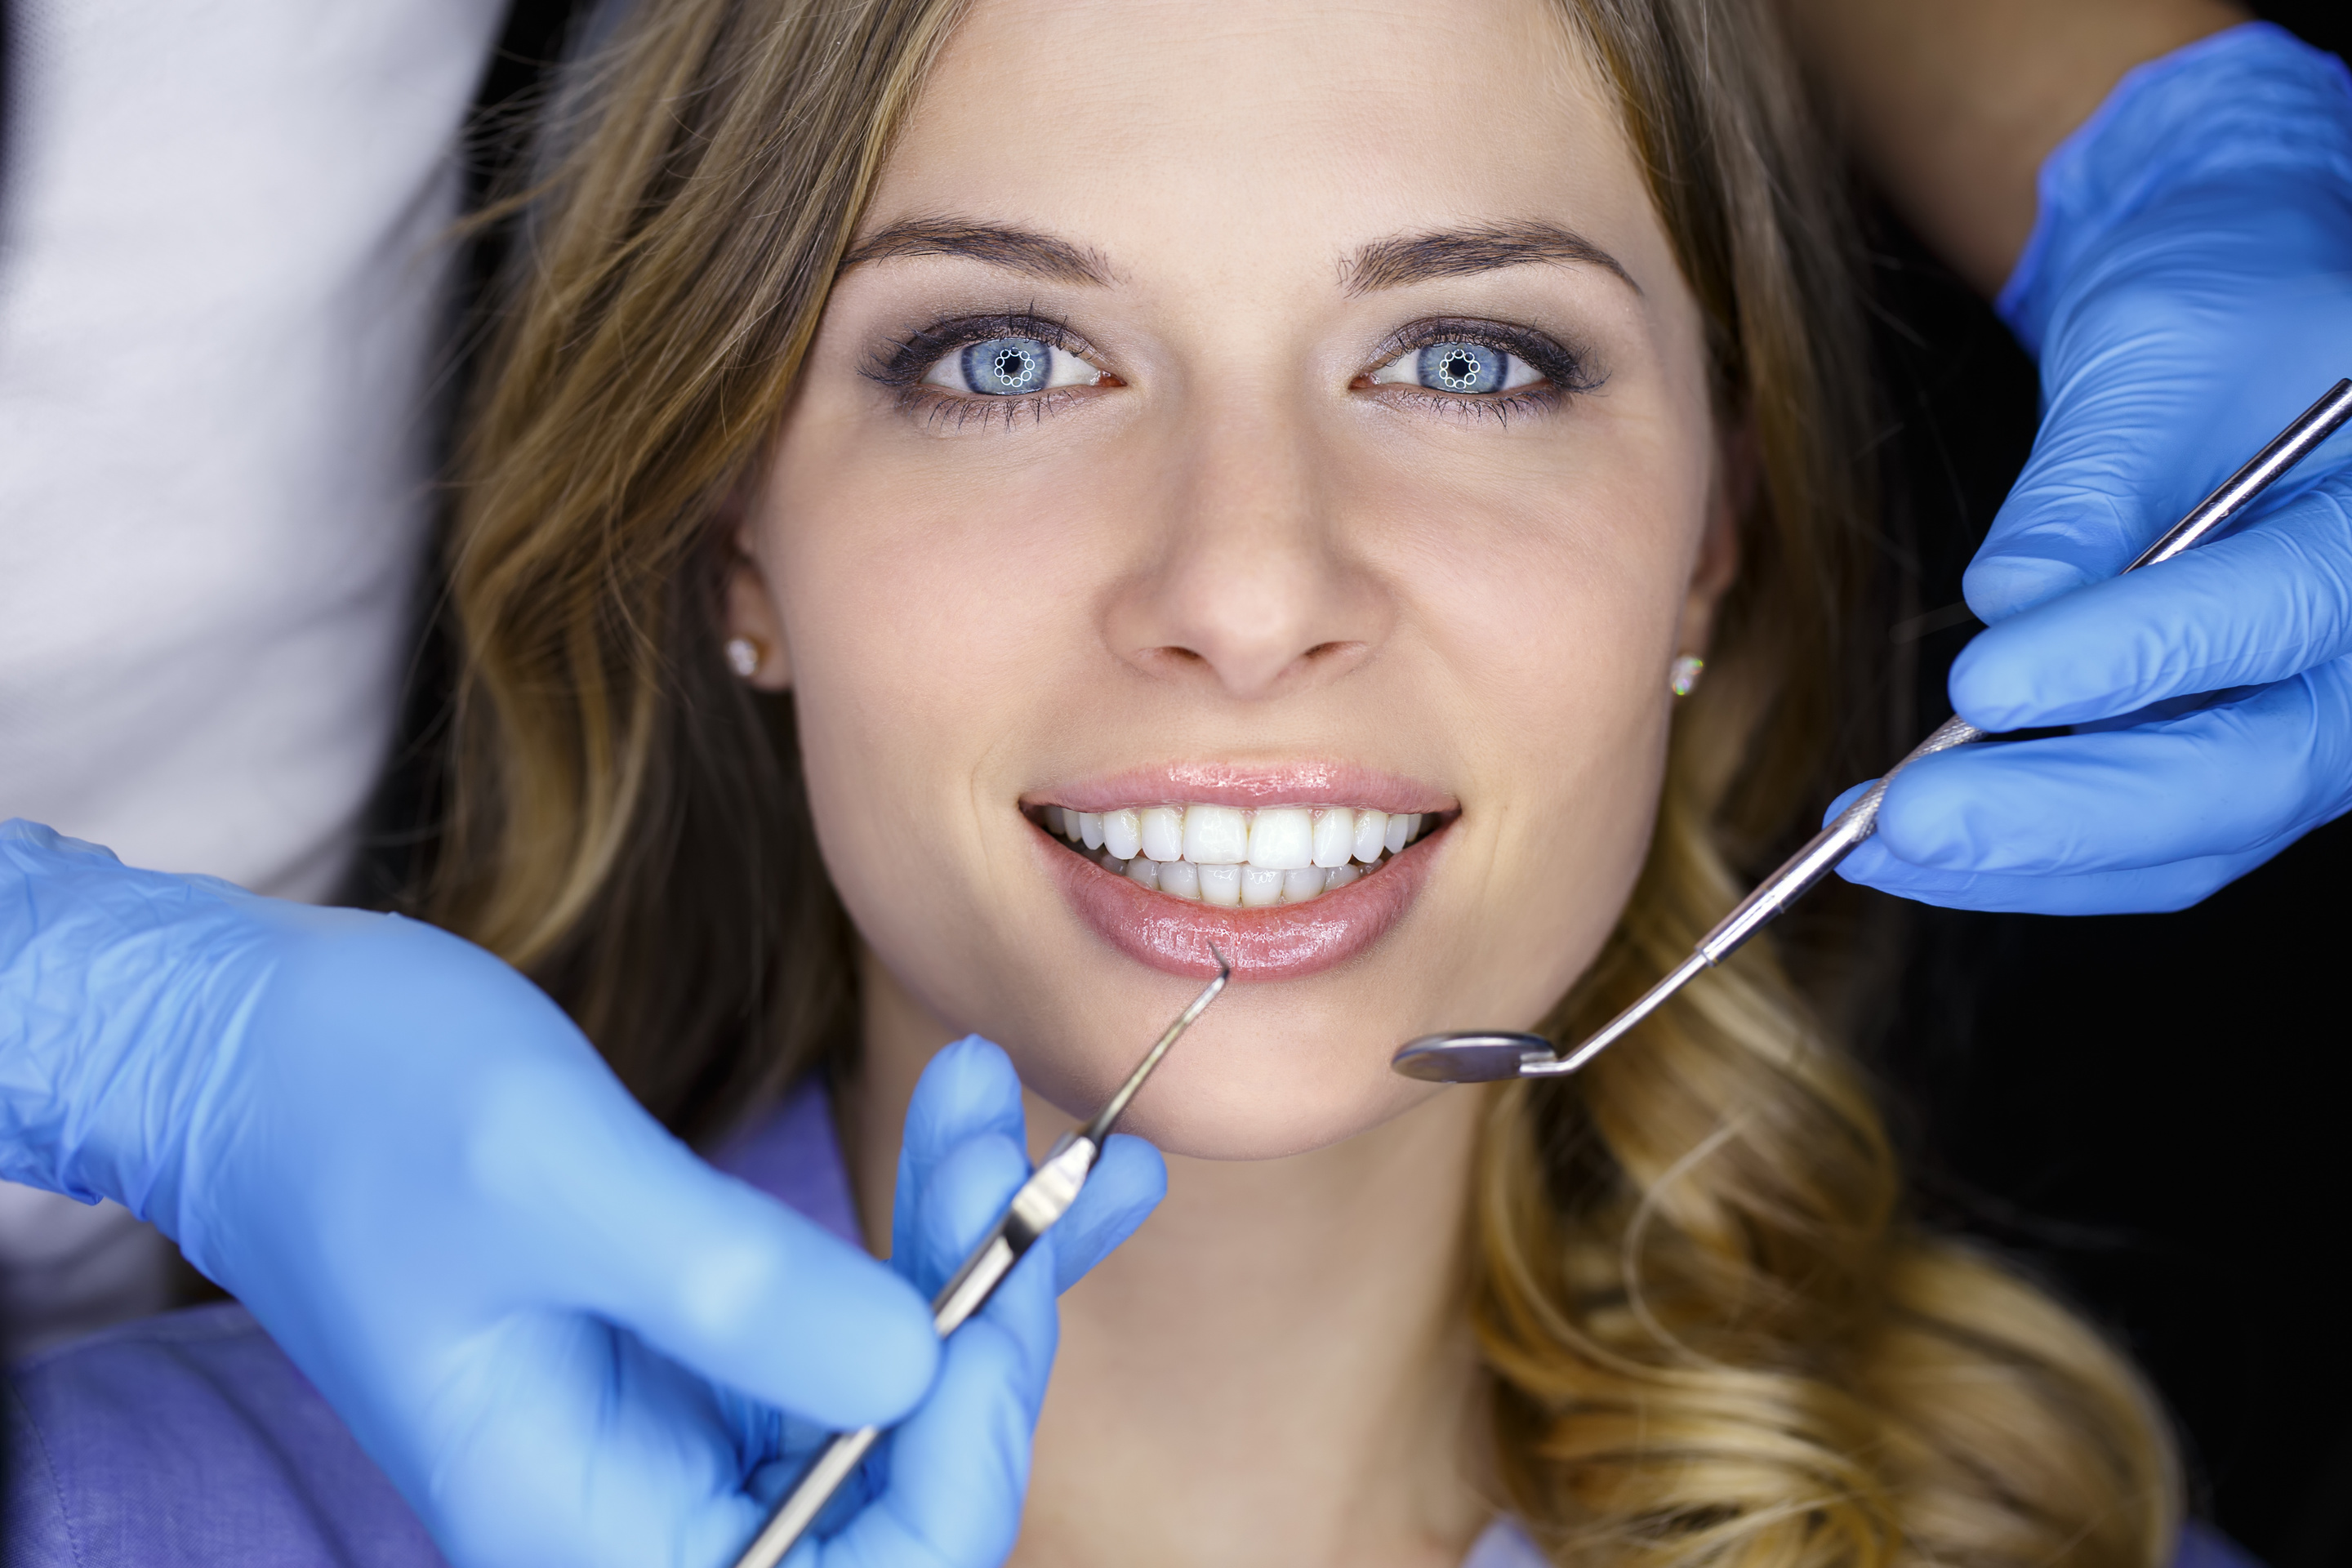 Where can I find a cosmetic dentist in Agoura Hills?